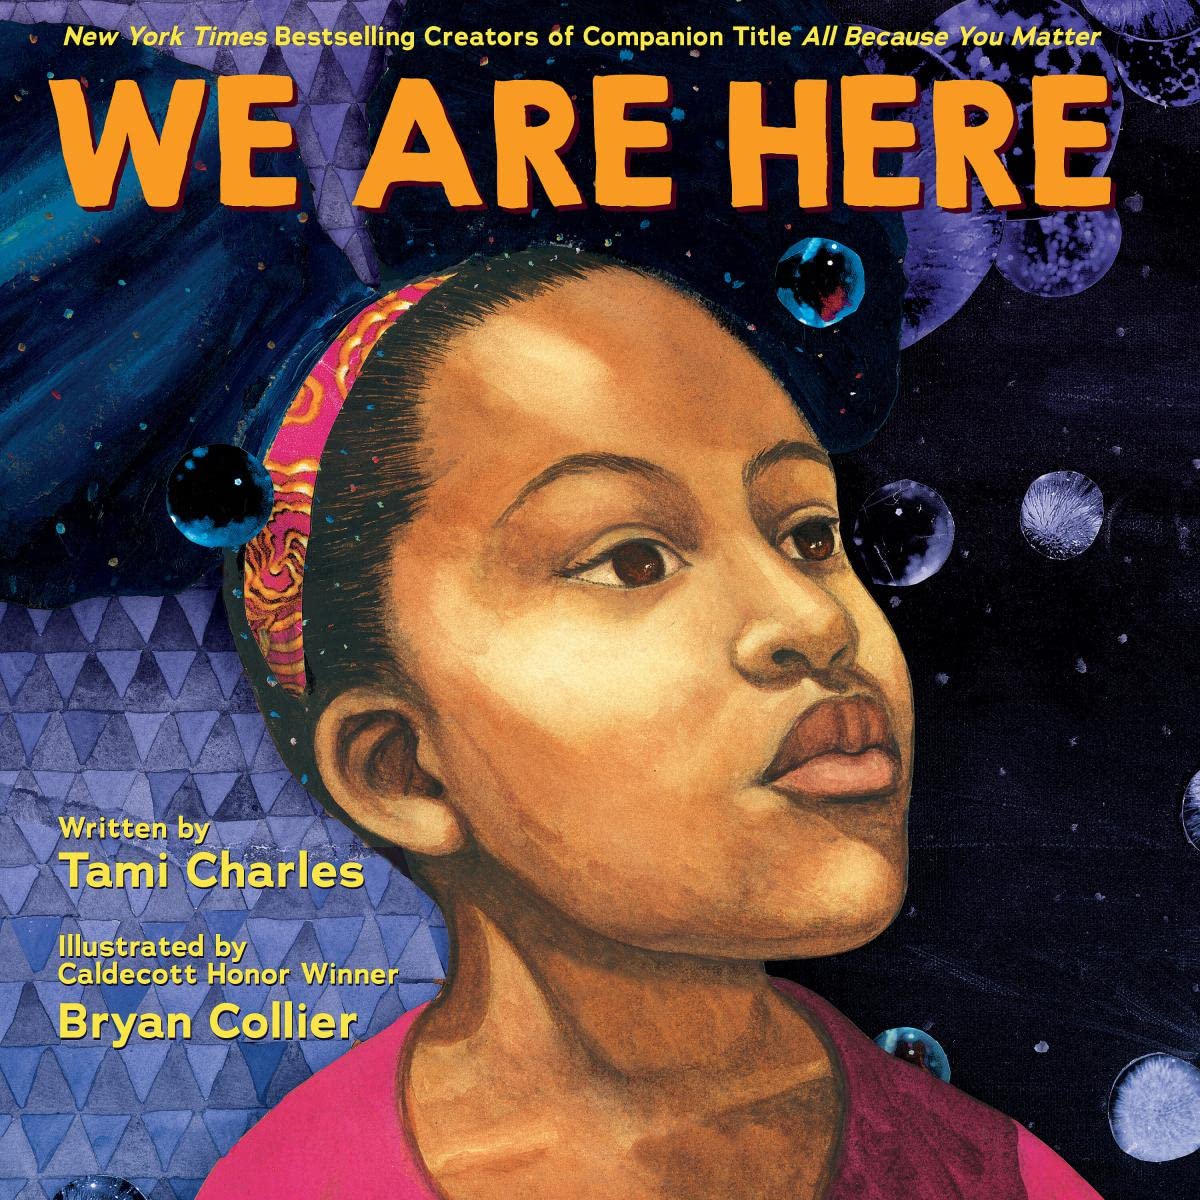 We Are Here (An All Because You Matter Book) Hardcover – Picture Book